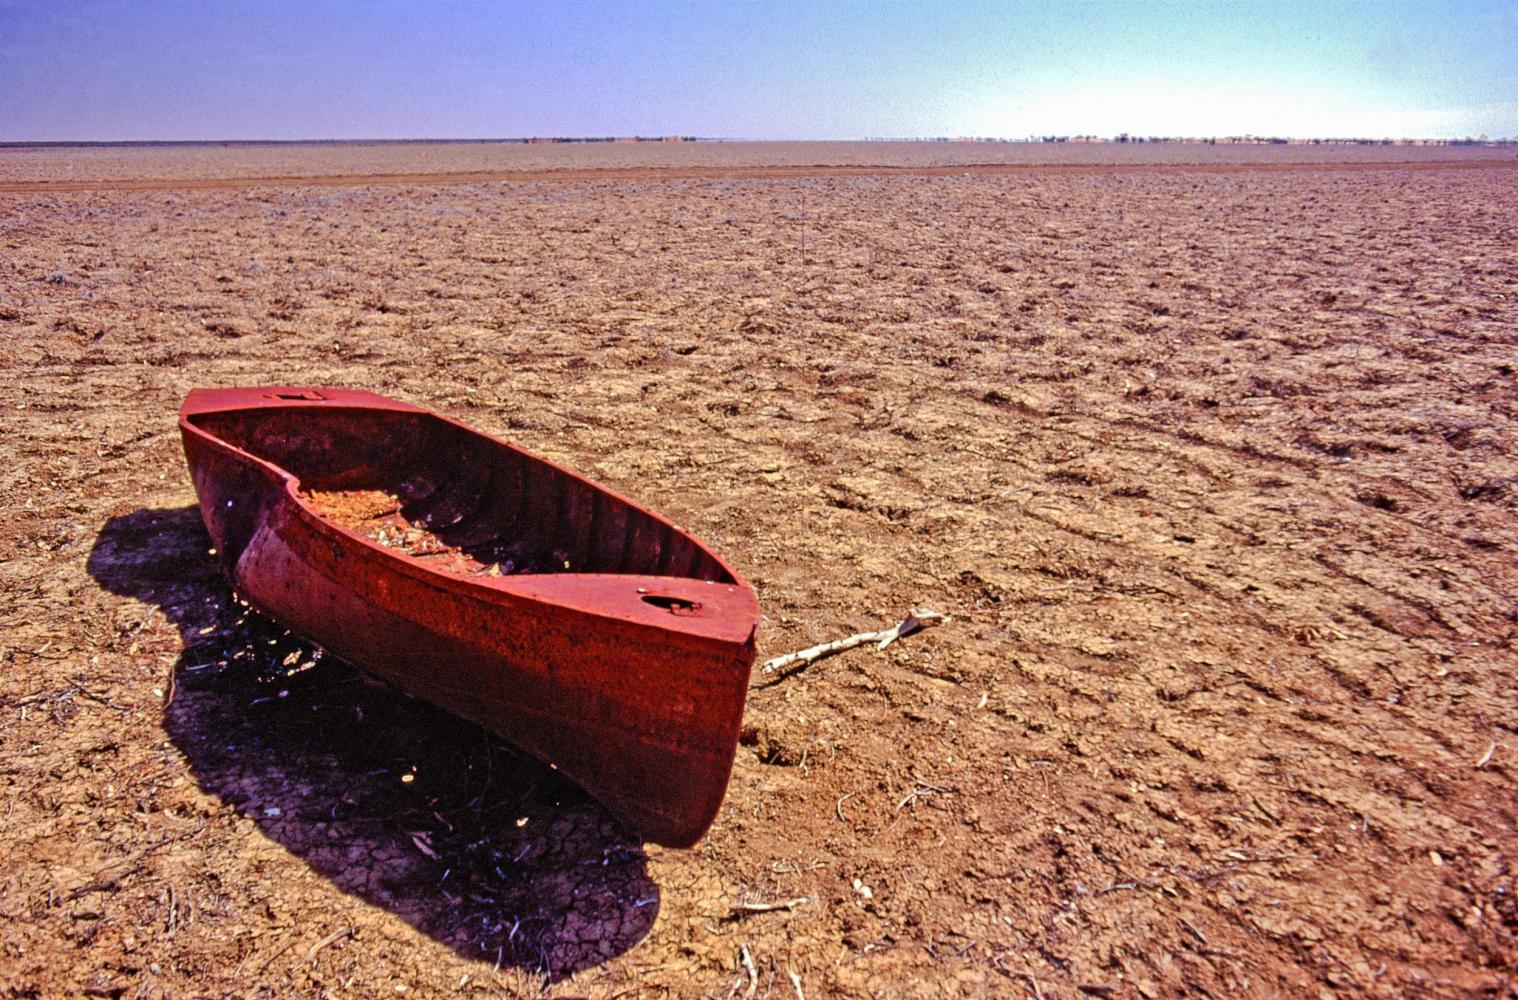 Old floodboat, near Windorah. Images such as this give clues to an unpredictable but central feature of the rivers of this area - their periodic flooding.